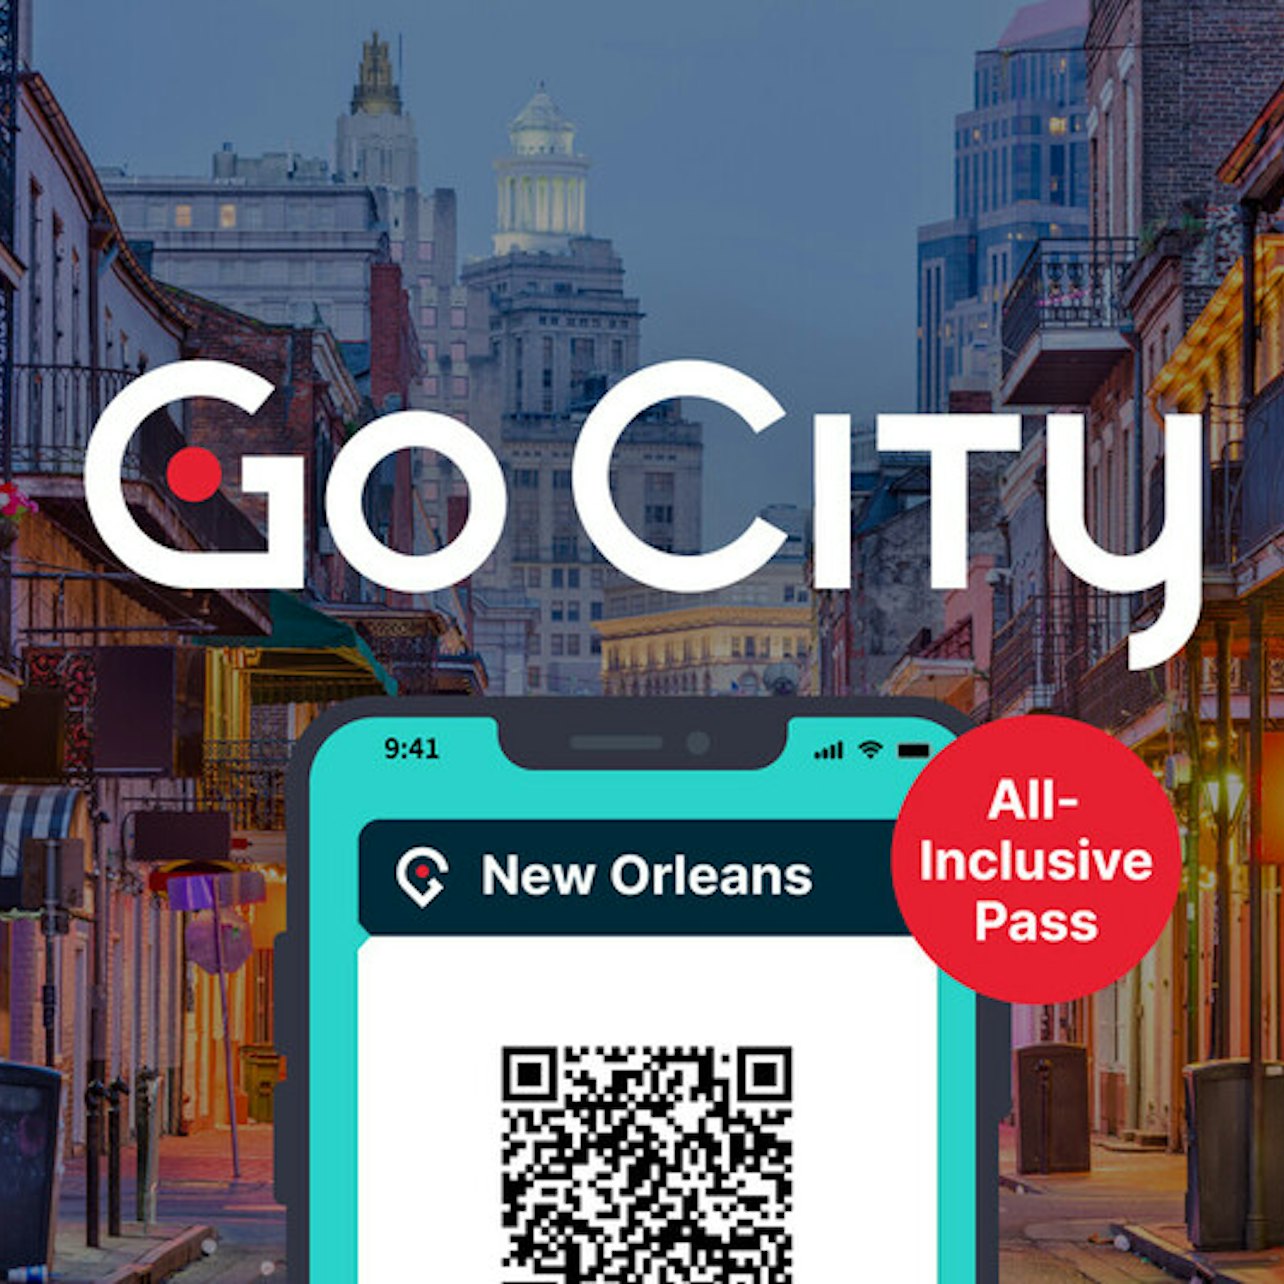 Go City New Orleans: All Inclusive Pass - Accommodations in New Orleans